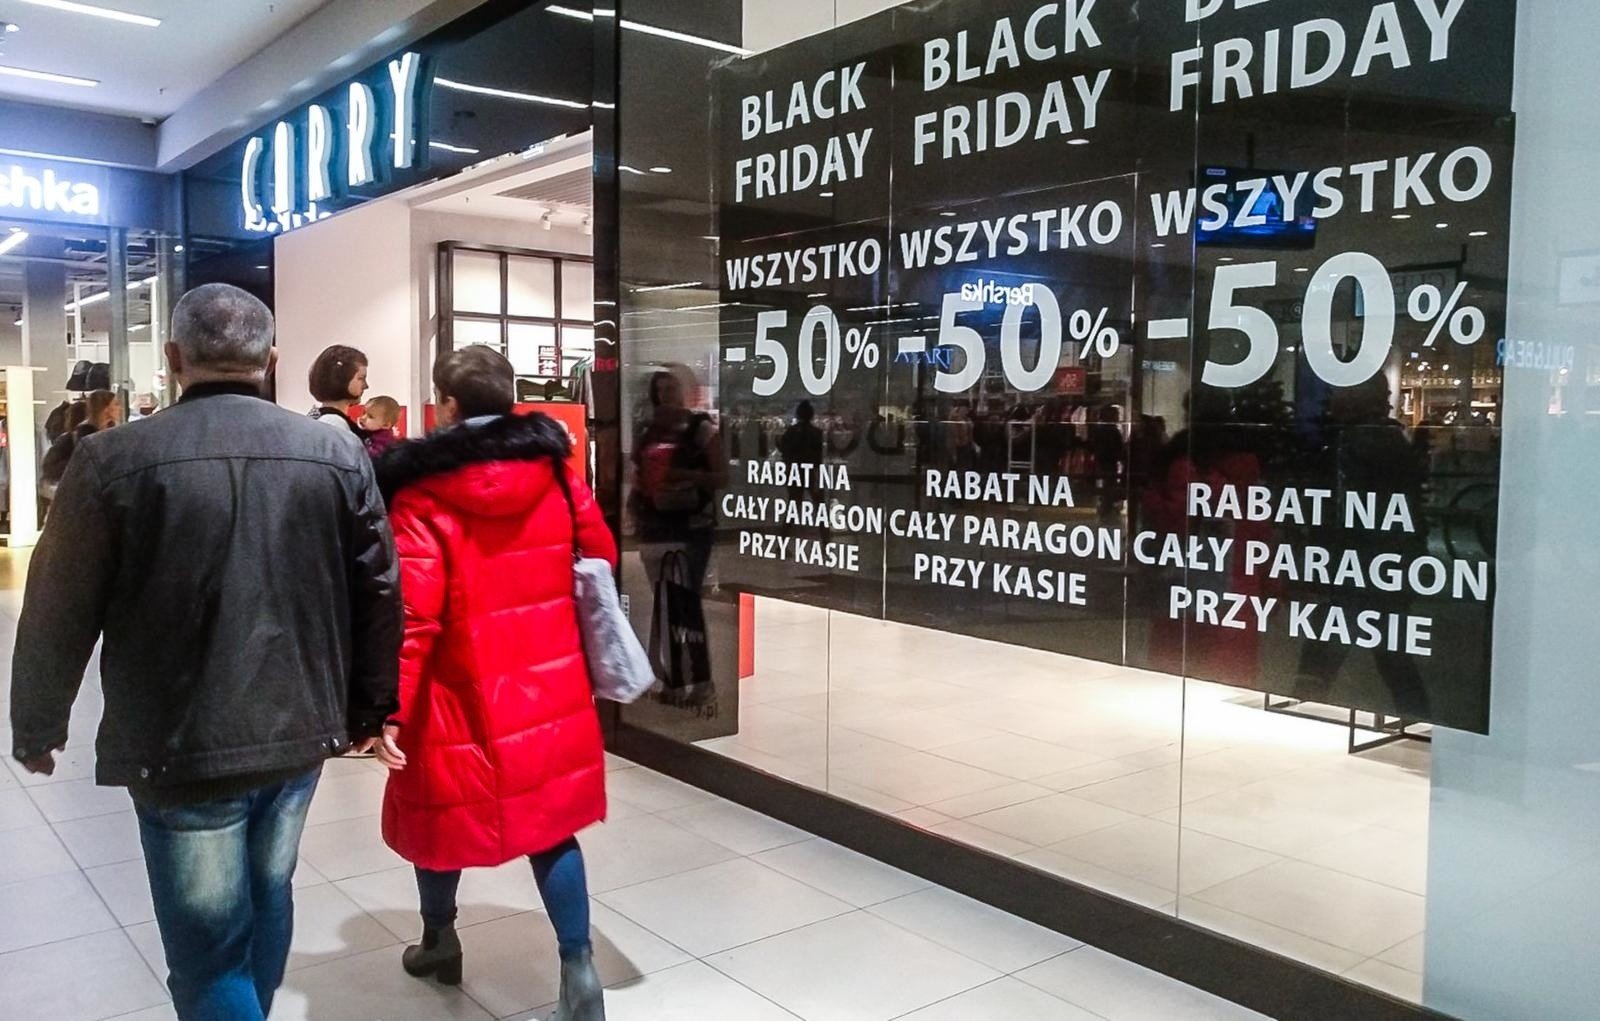 Black Friday 2019 PROMOTIONS AND SALE: Reserved, Zara, Wittchen, H & M,  Intimissimi, Yes. Check when and where is black Friday